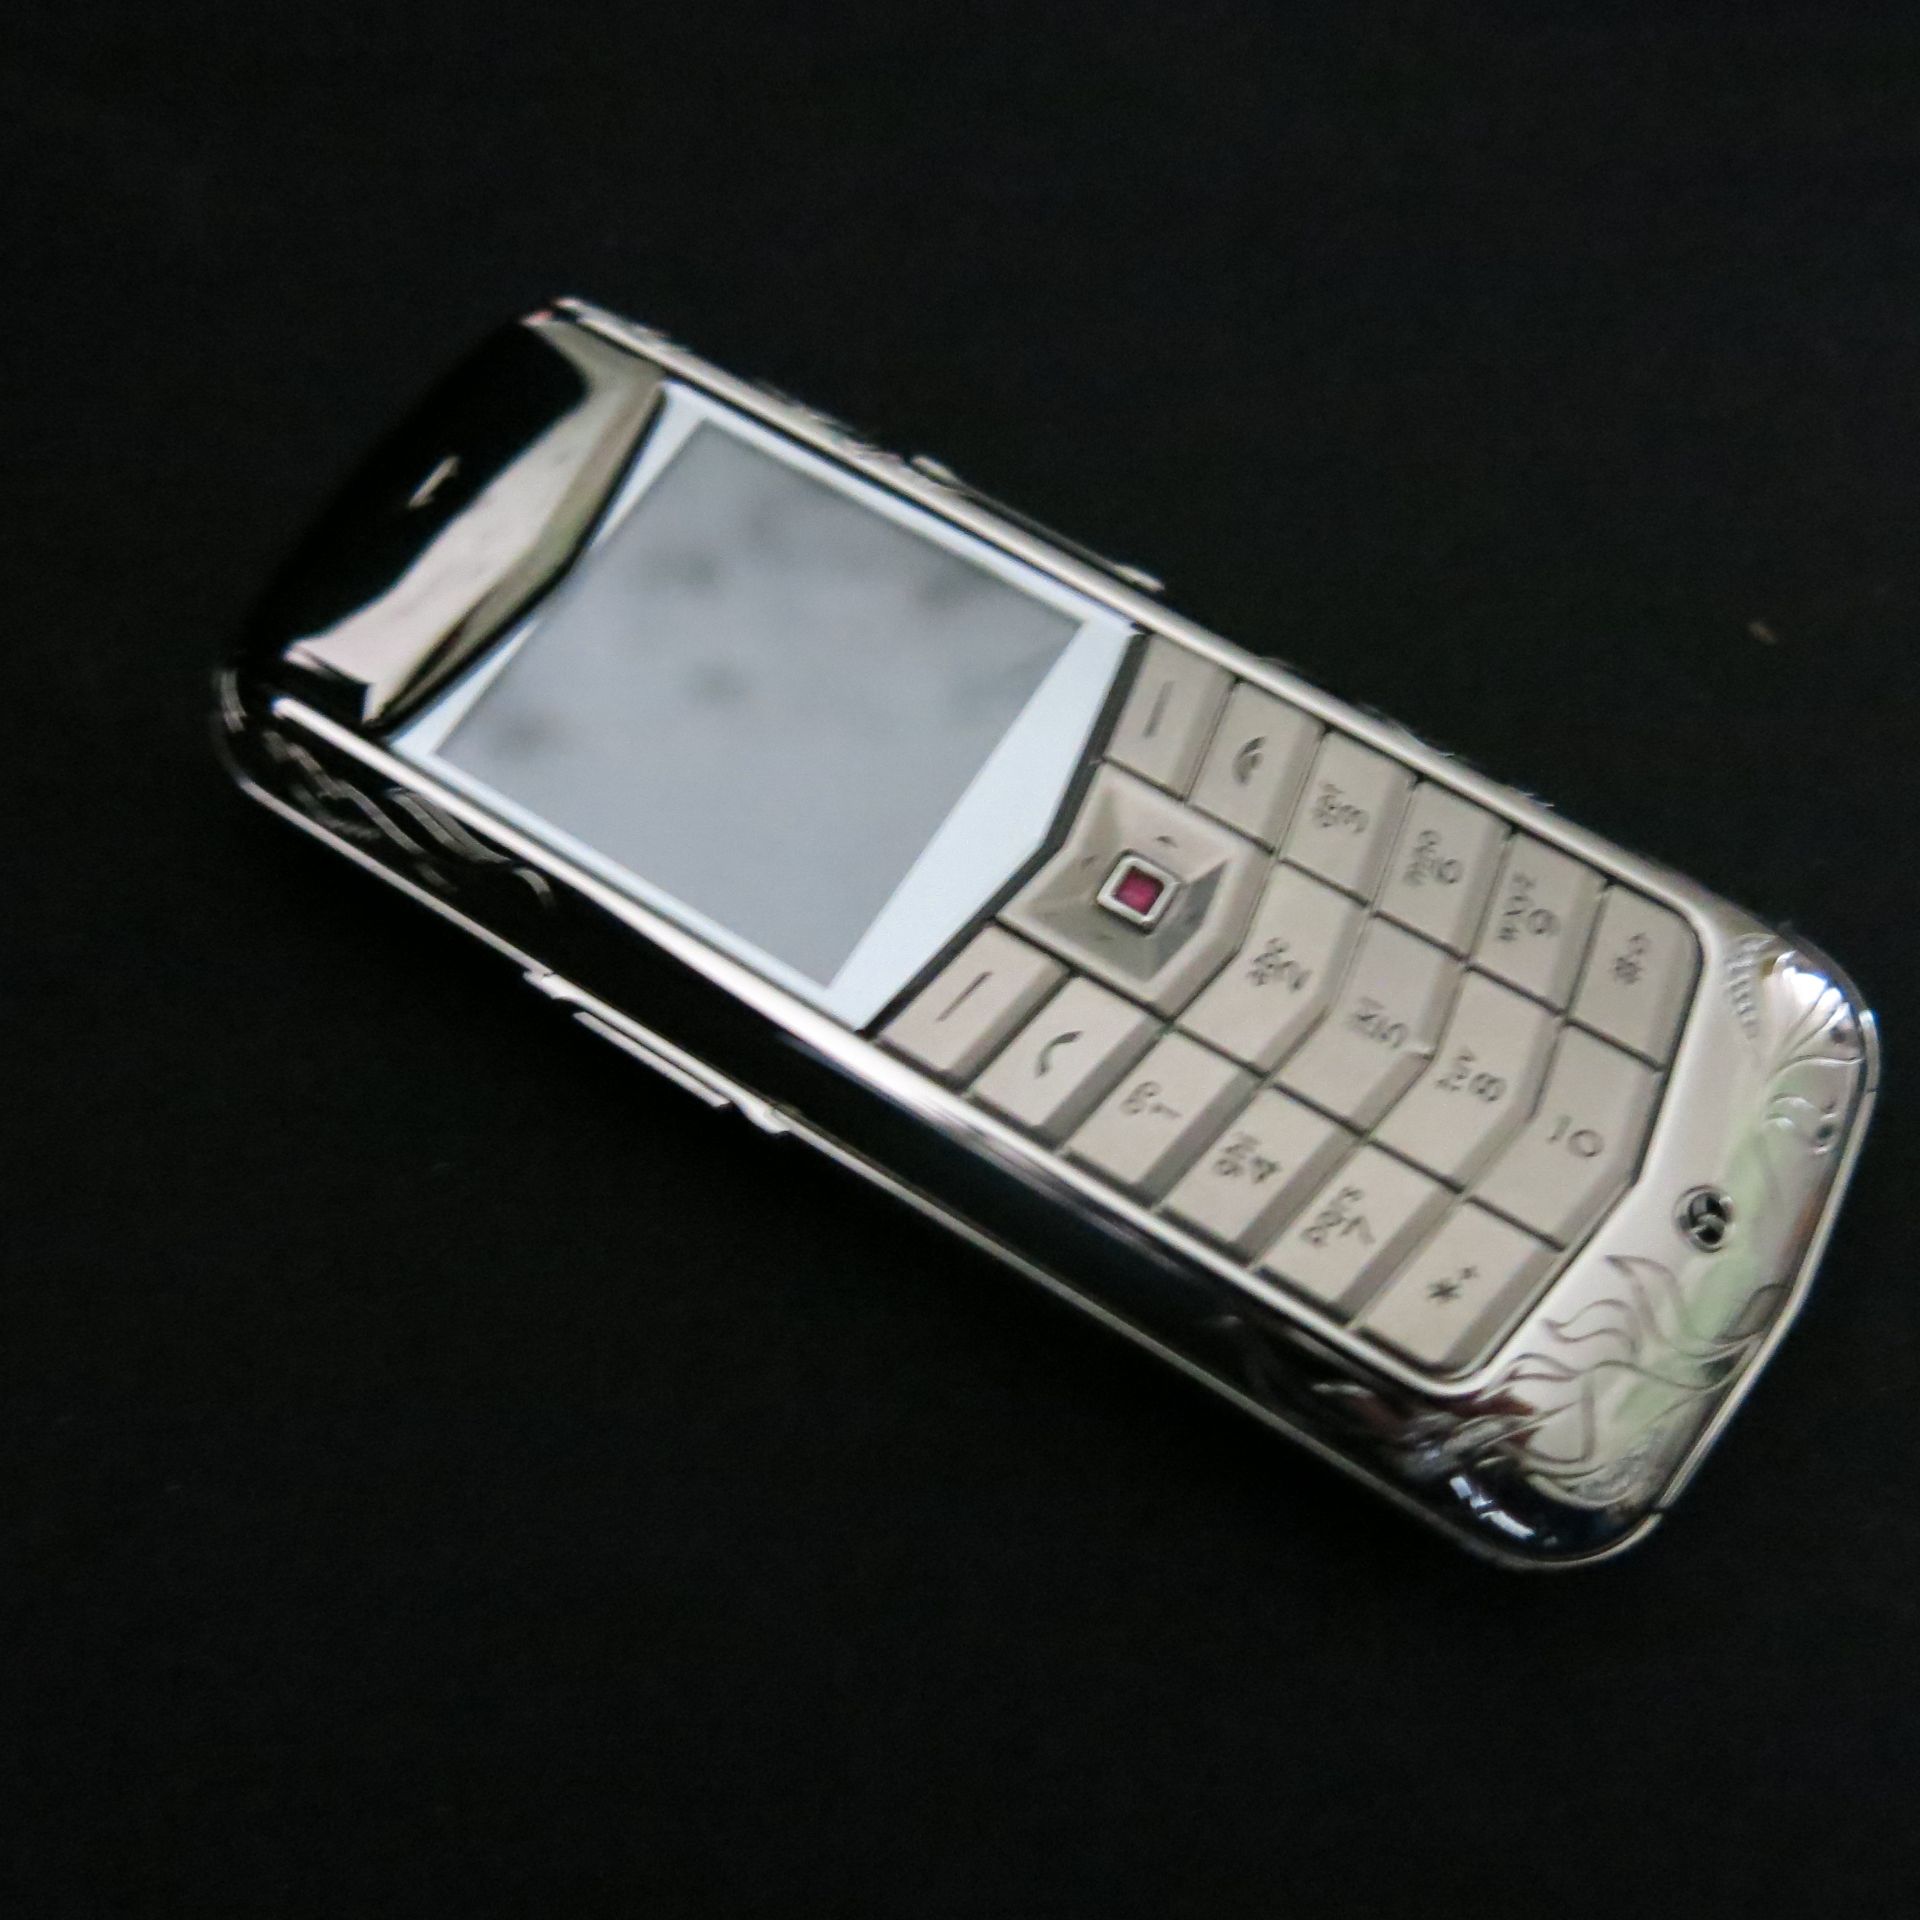 Entire Contents of the VERTU Museum Collection to Include: 105 Various Iconic Phones & Appearance - Image 102 of 106